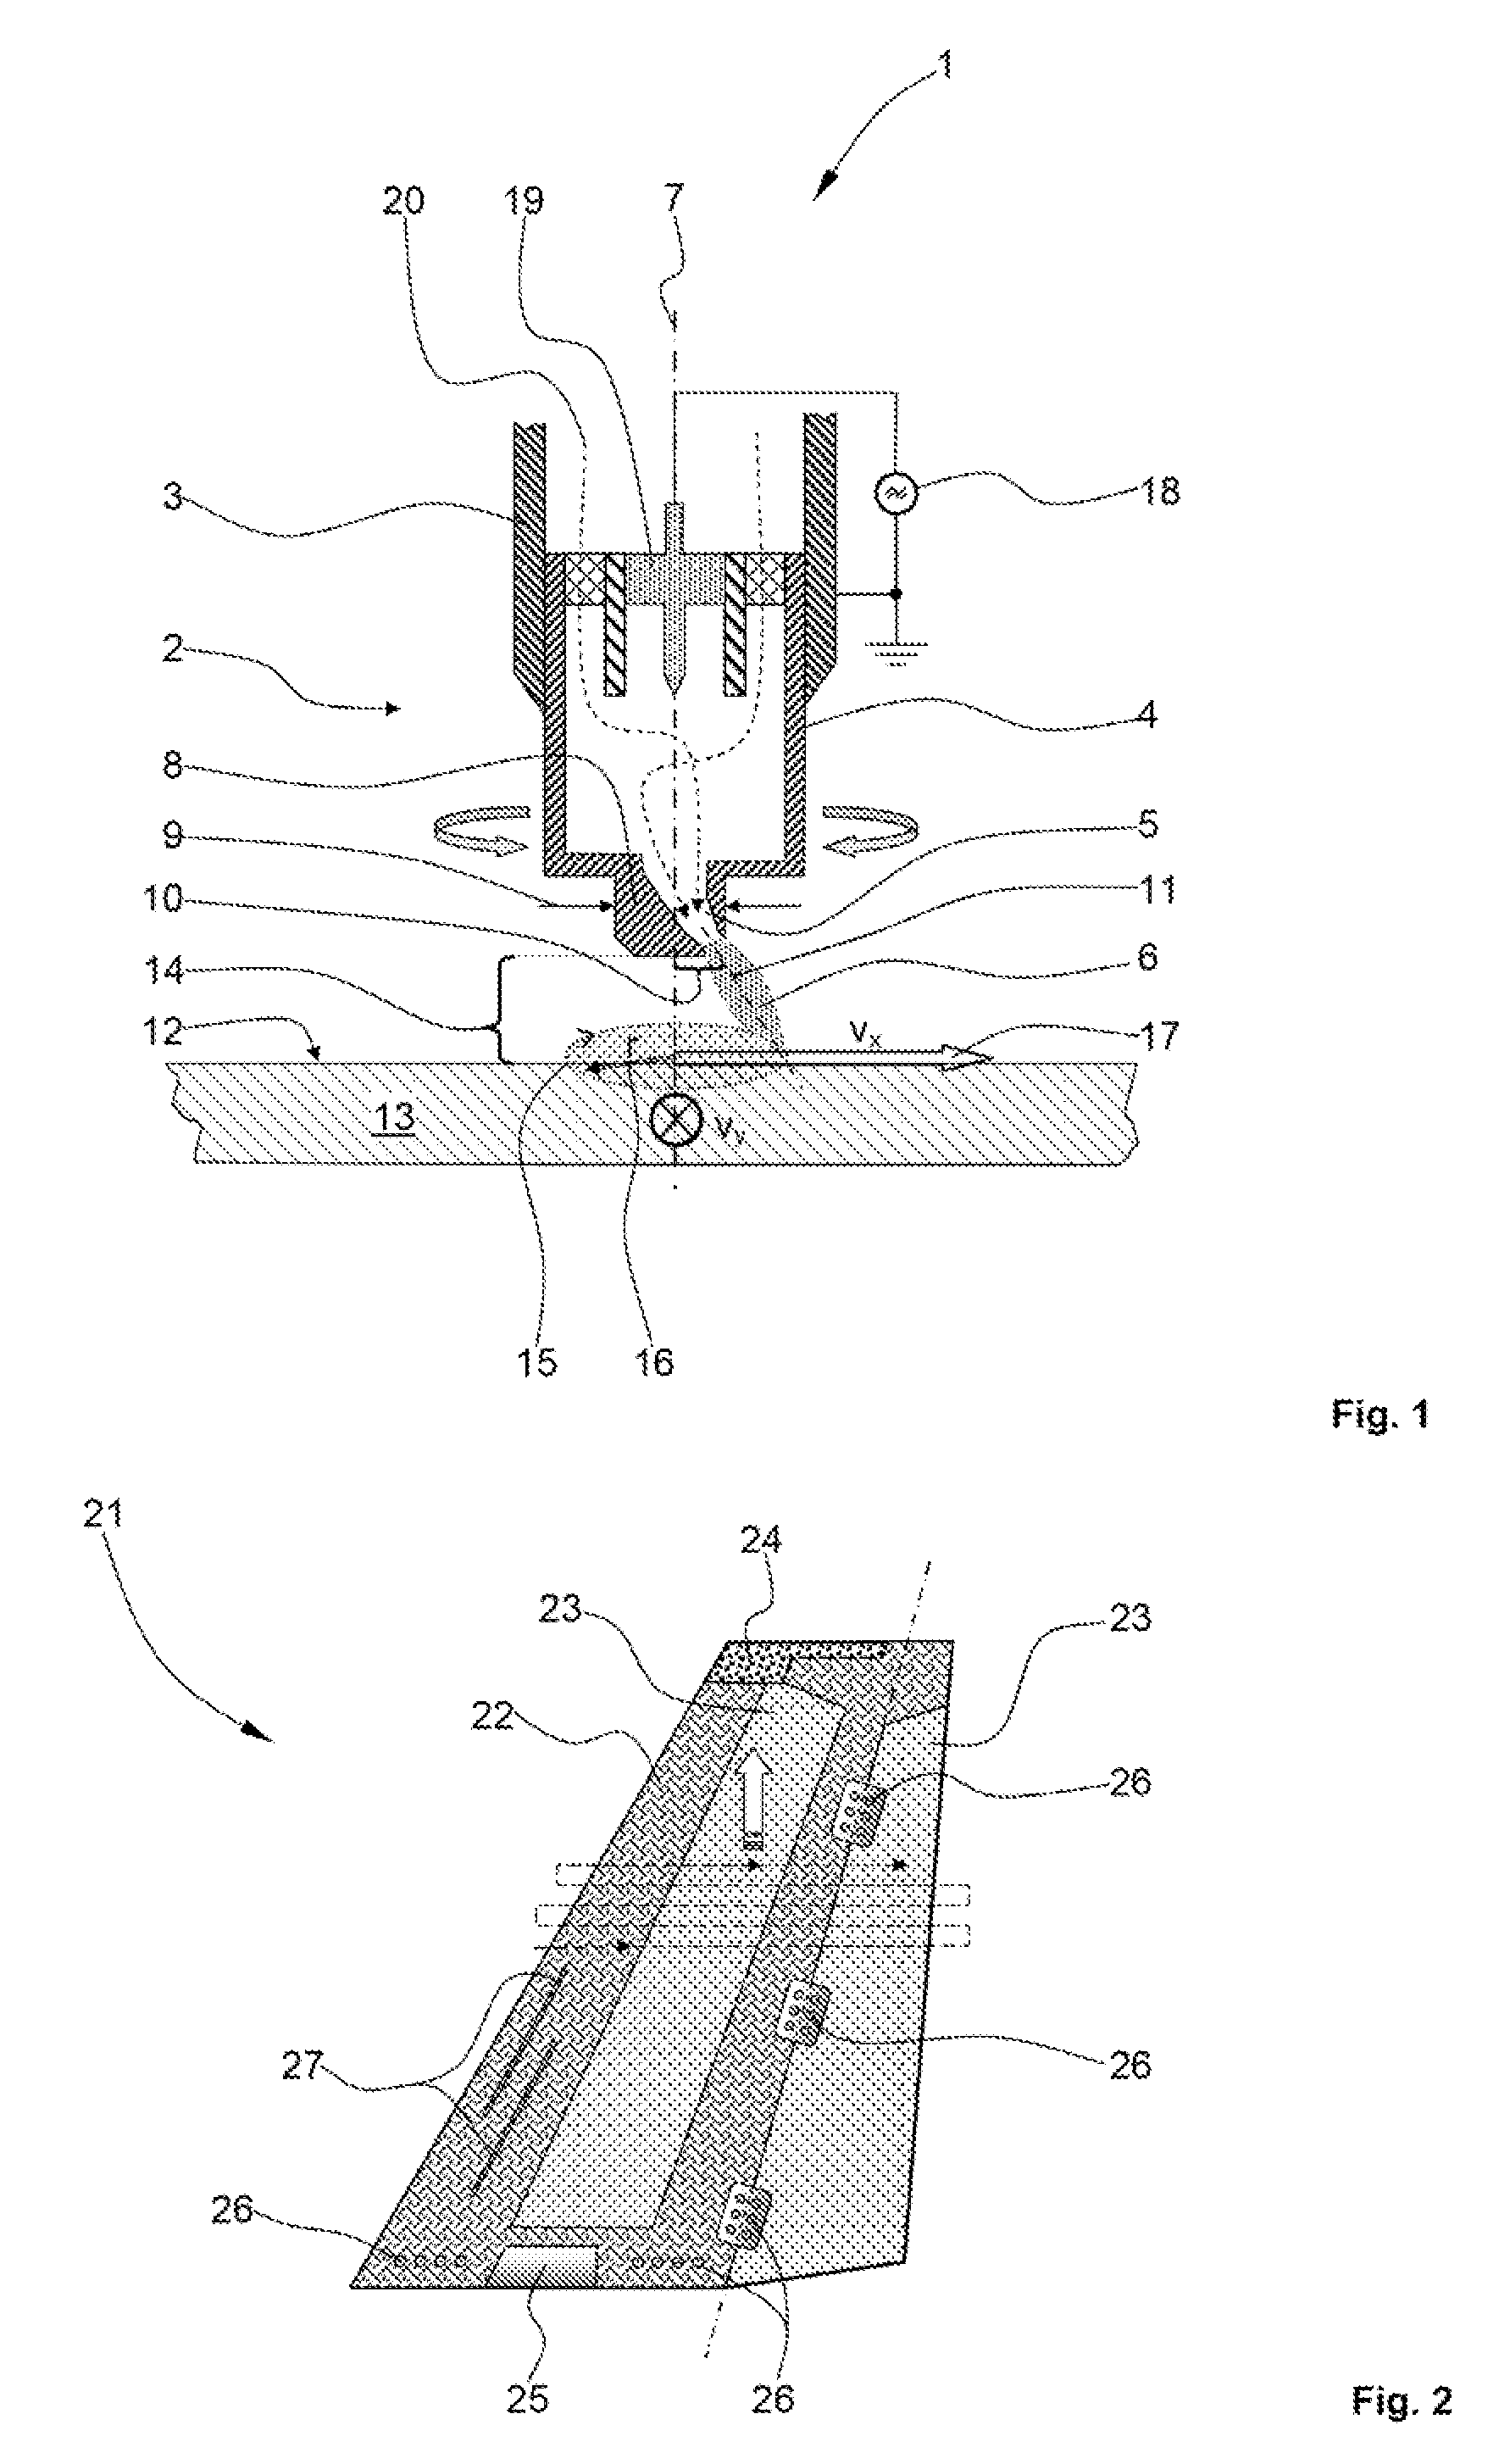 Method for plasma treatment and painting of a surface